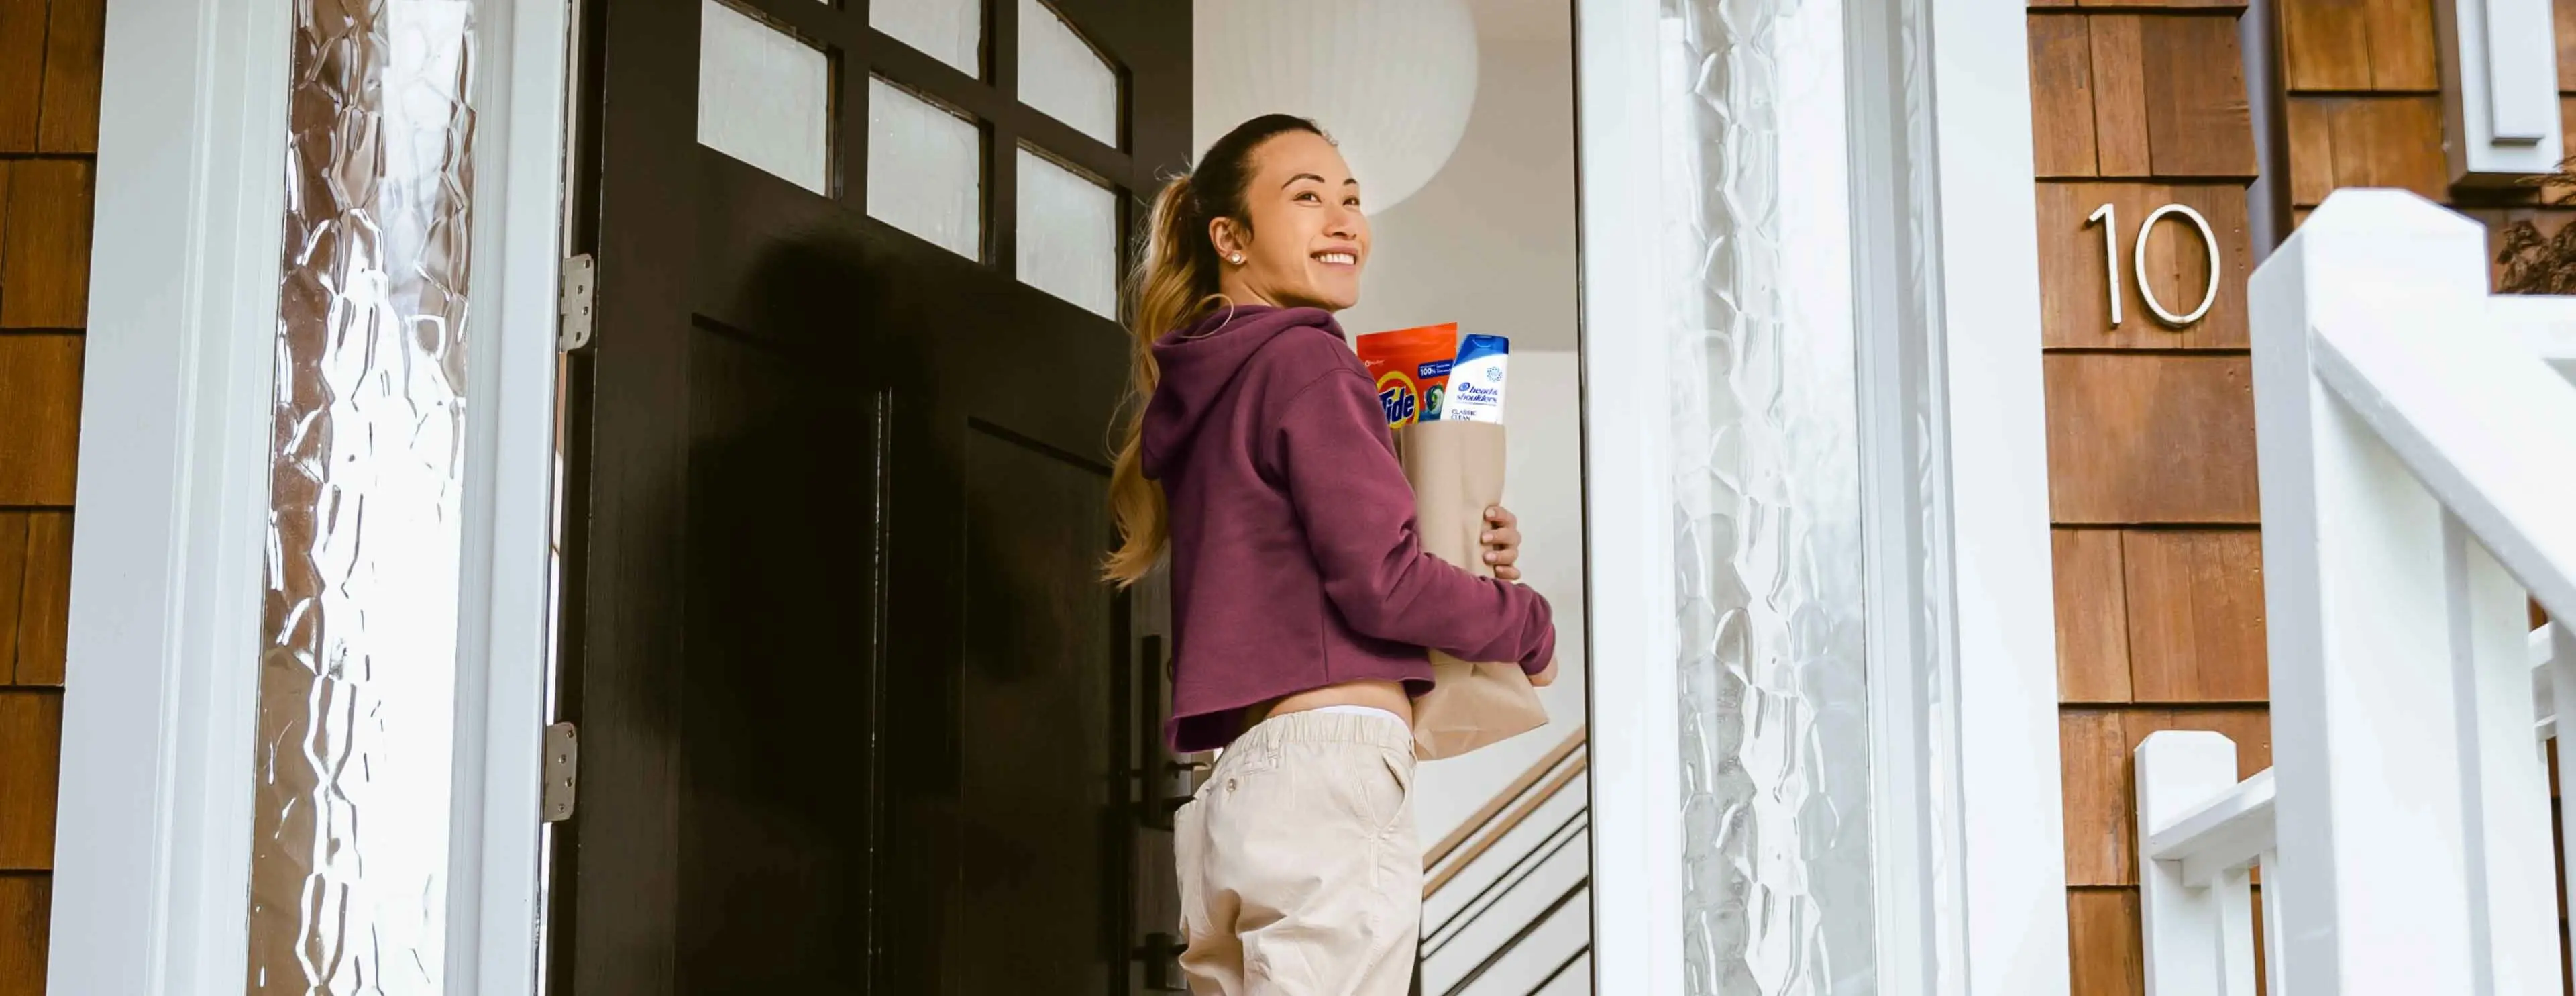 Woman enters front door of house while holding brown paper grocery bag containing Tide detergent and Head & Shoulders shampoo 